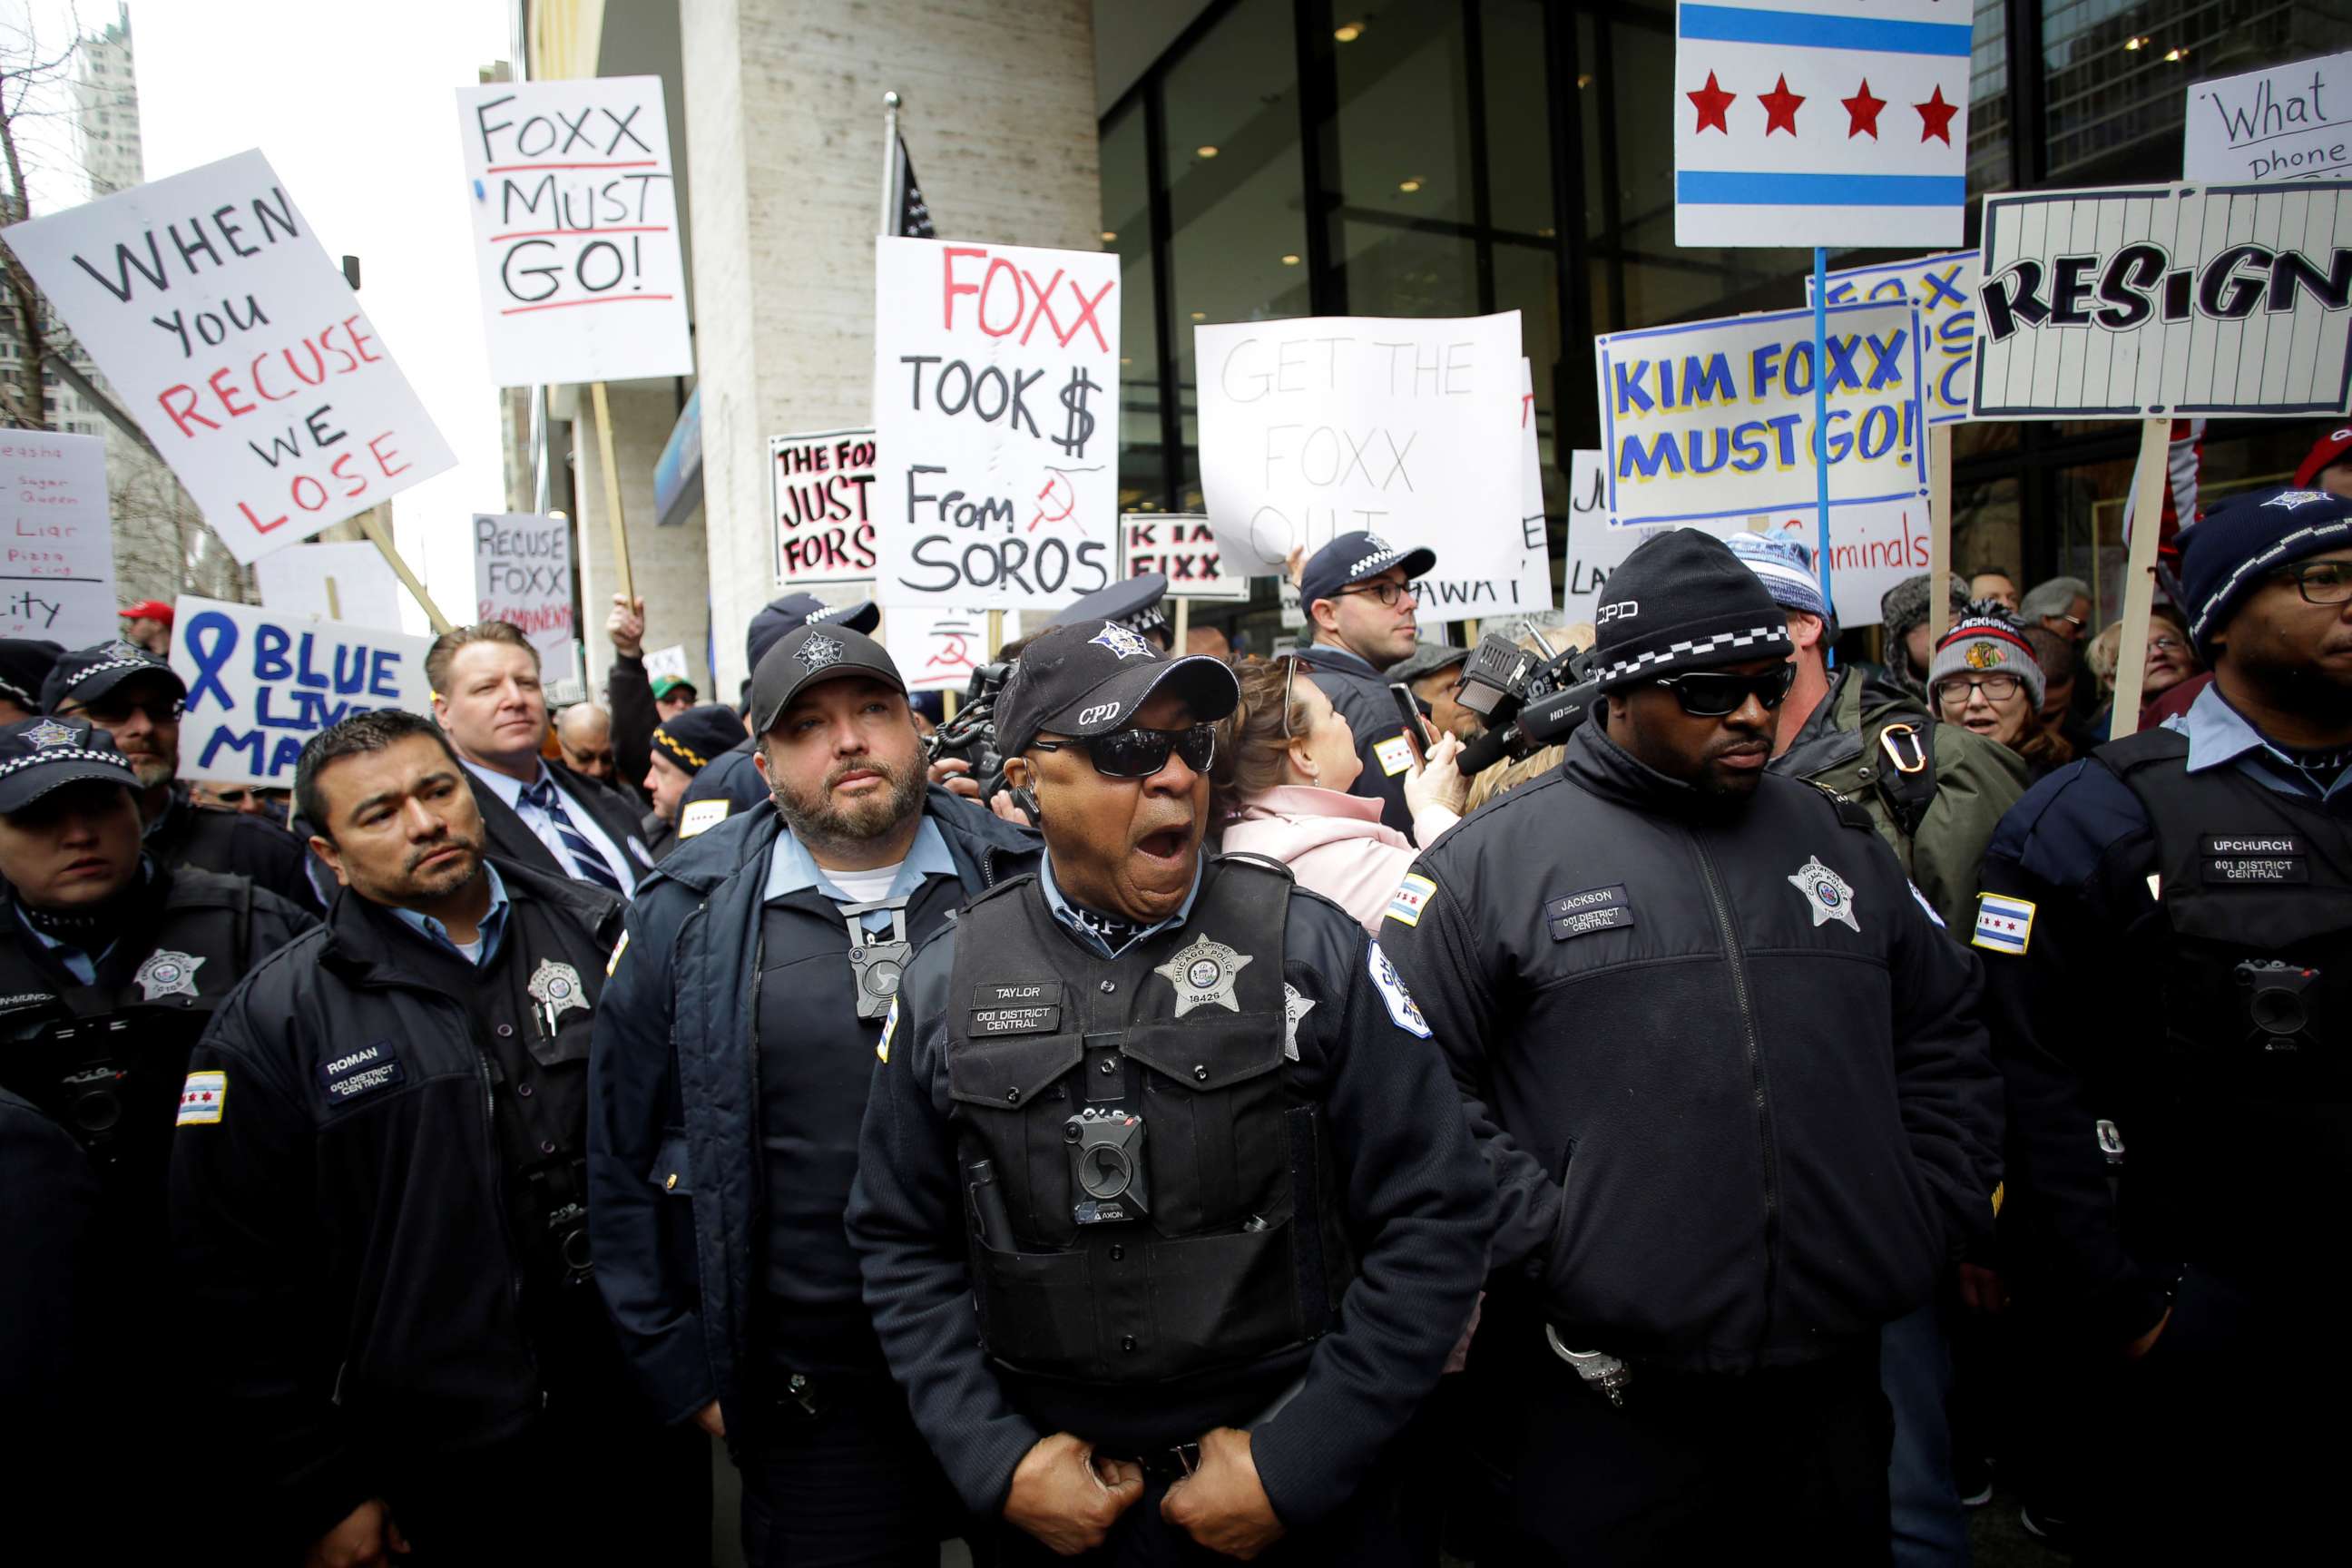 PHOTO:Chicago police officers stand in front of Fraternal Order of Police supporters protesting the handling of the Jussie Smollett case by the State's Attorney Kim Foxx in Chicago, April 1, 2019.  